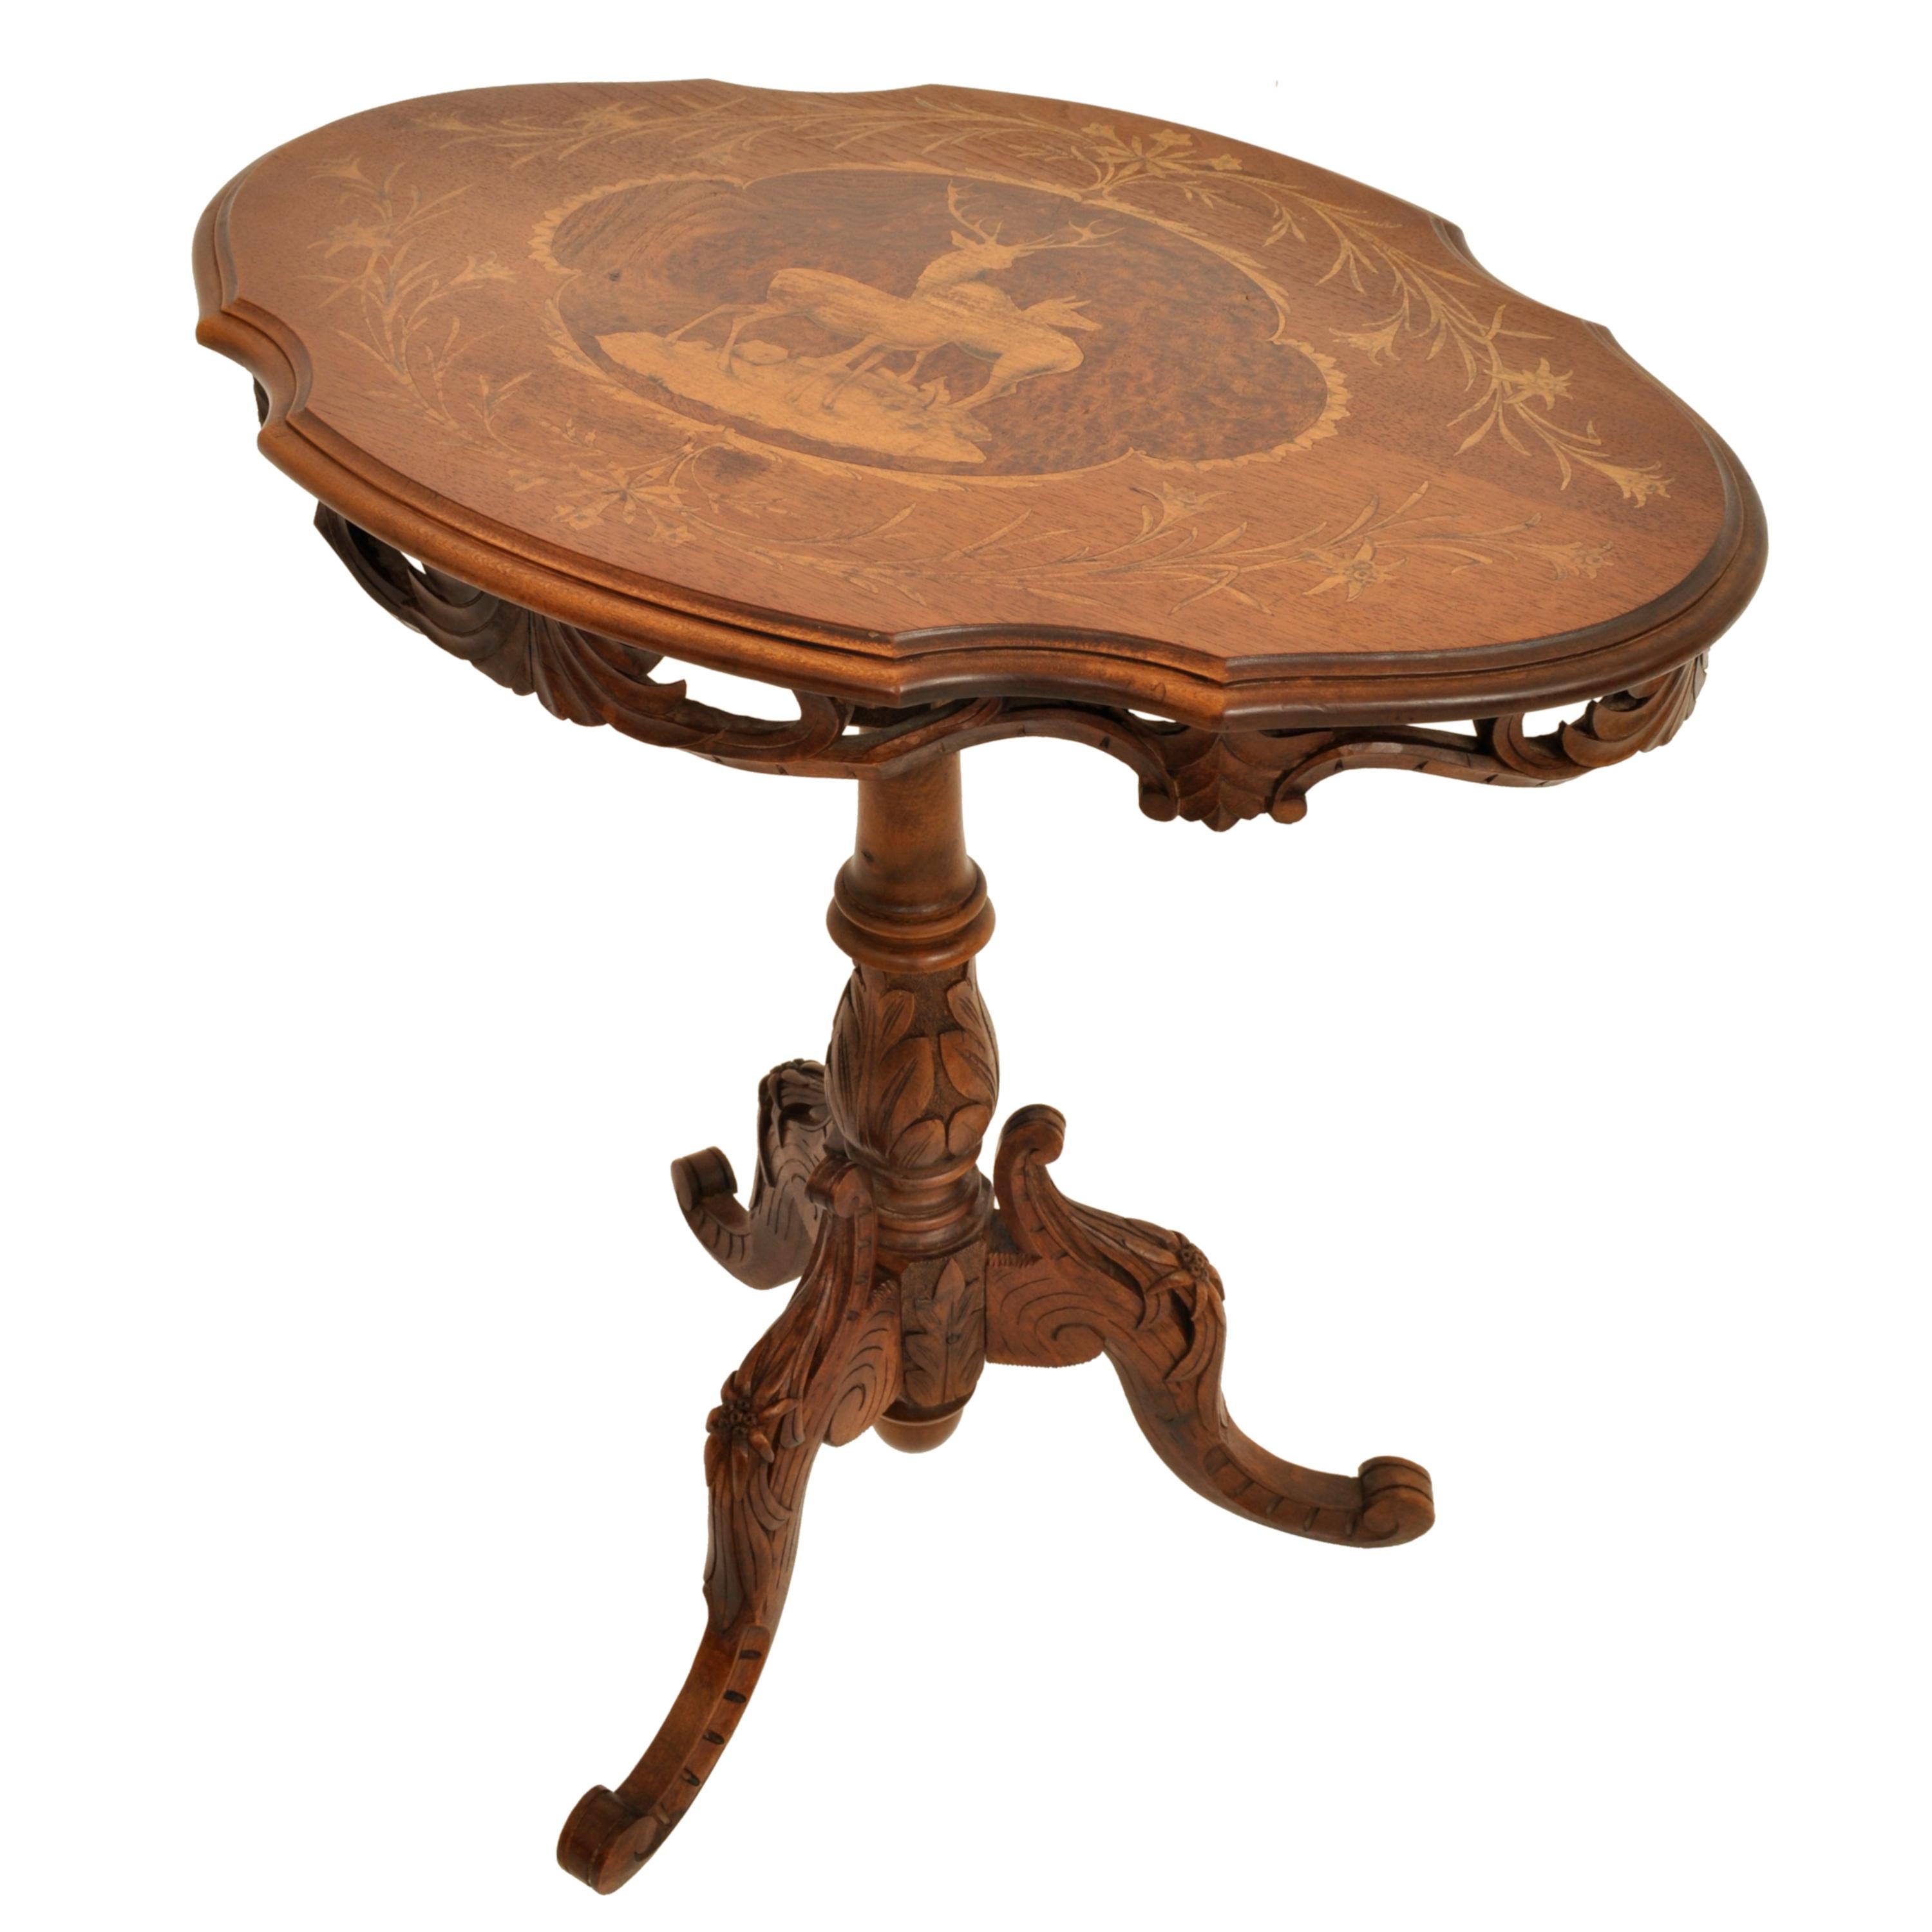 Late 19th Century Antique Swiss Black Forest Carved Inlaid Walnut Marquetry Tilt-Top Table, 1870